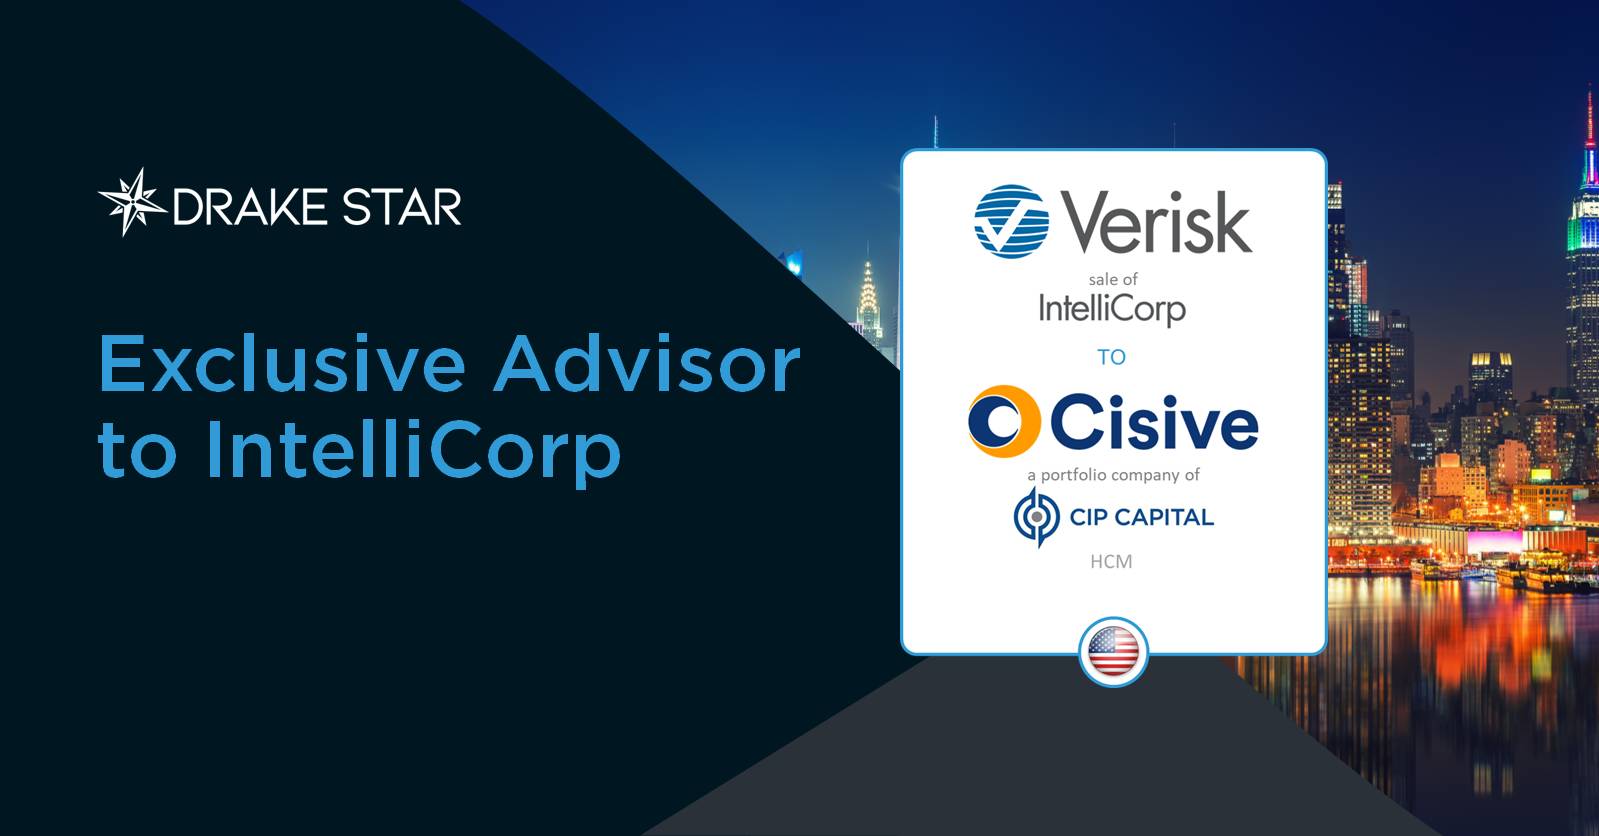 Drake Star Partners Acts Exclusive Advisor in the Sale IntelliCorp